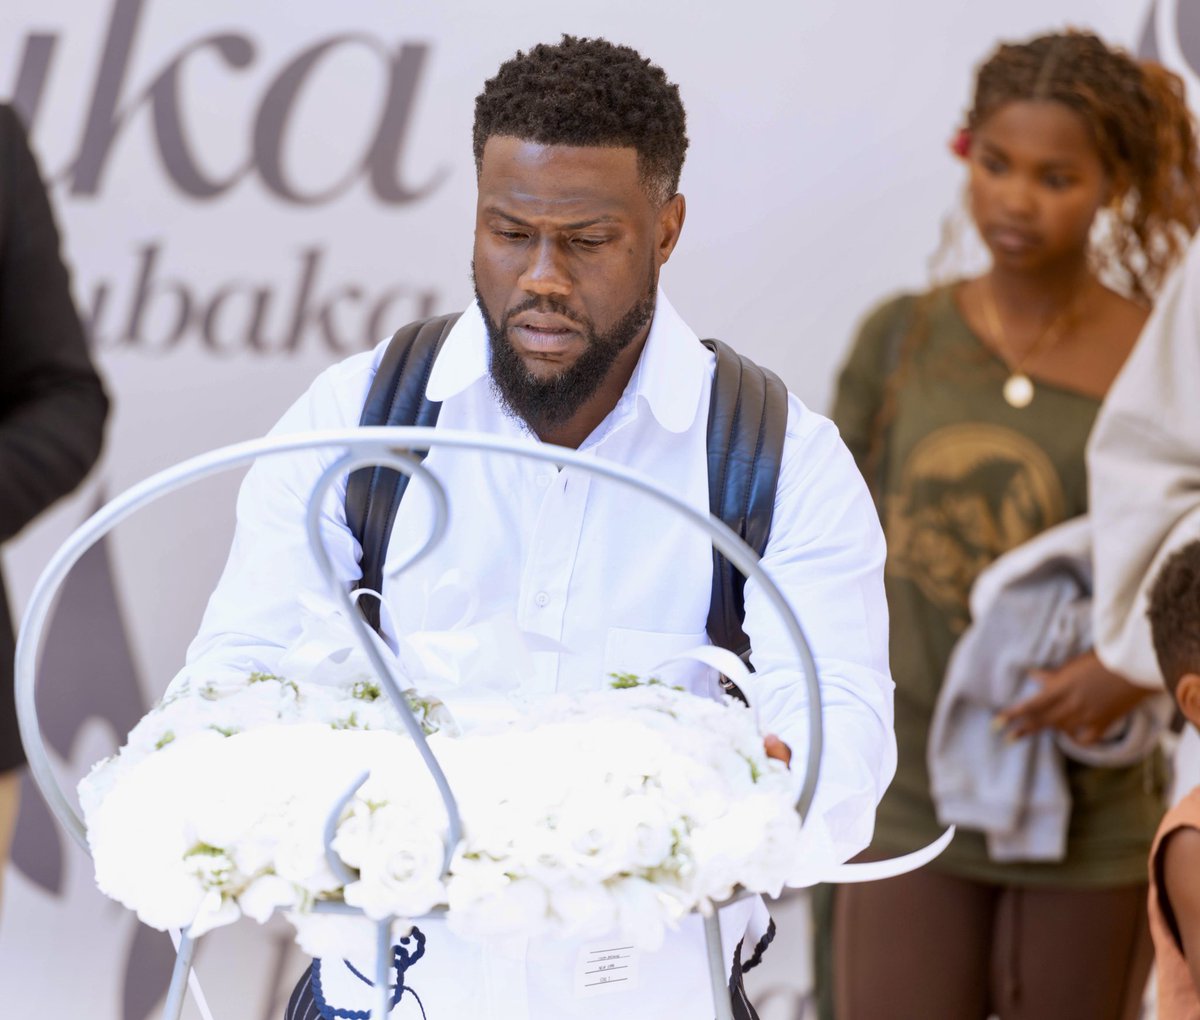 On his recent visit, @KevinHart4real paid respects to the victims of Genocide against the Tutsi. #Kwibuka29